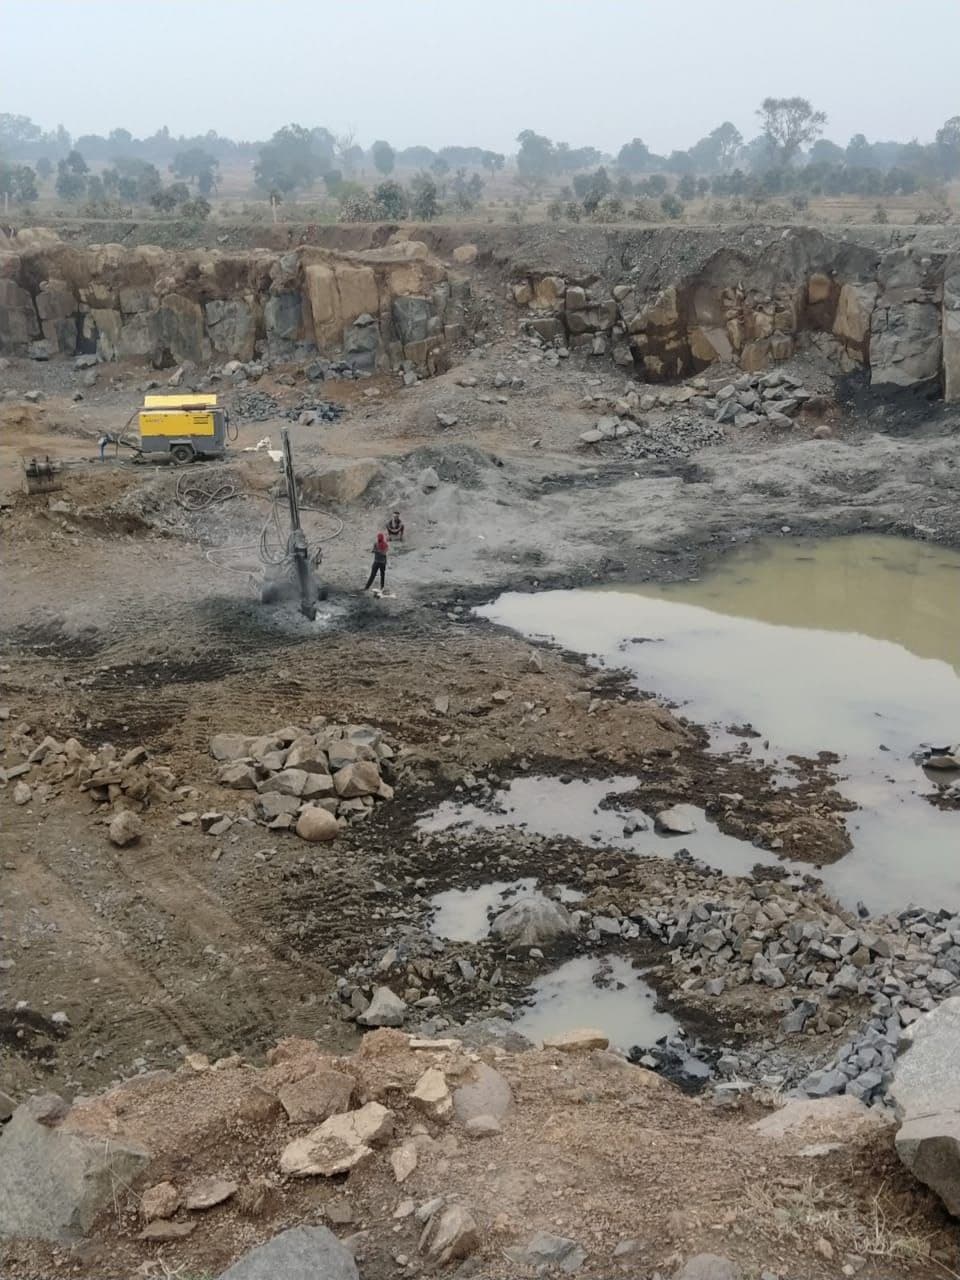 In Dongria Kalan, the contractor is ignoring the rules and mining ston